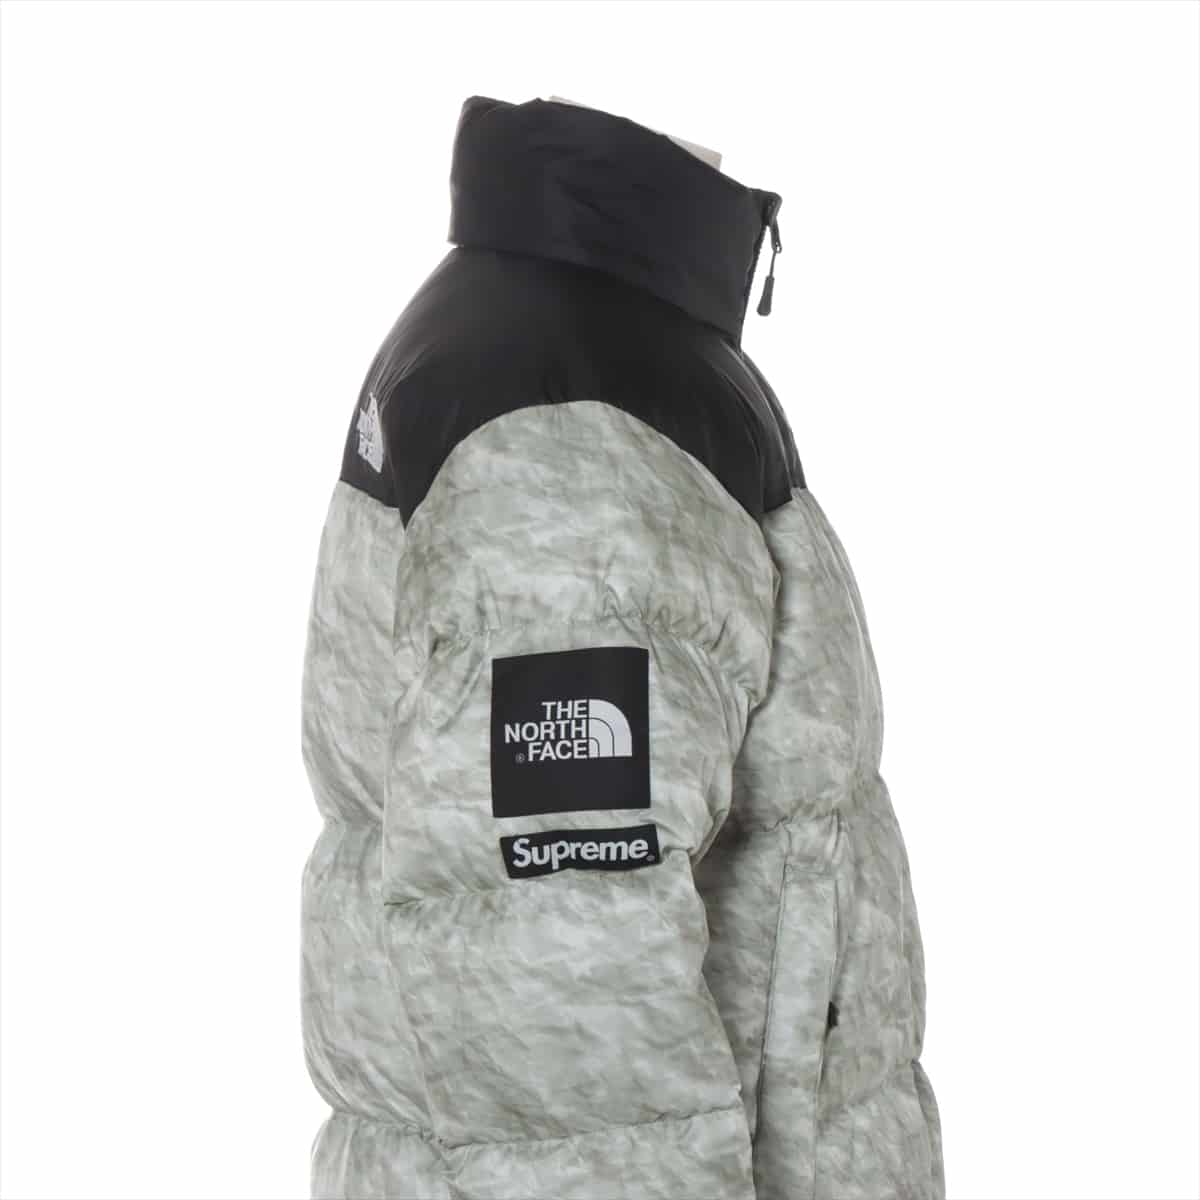 SUPREME × THE NORTH FACE 19AW Nylon Down jacket M Men's Black x Gray  ND91806I Paper Print Nuptse Jacket Can be stored in the hood